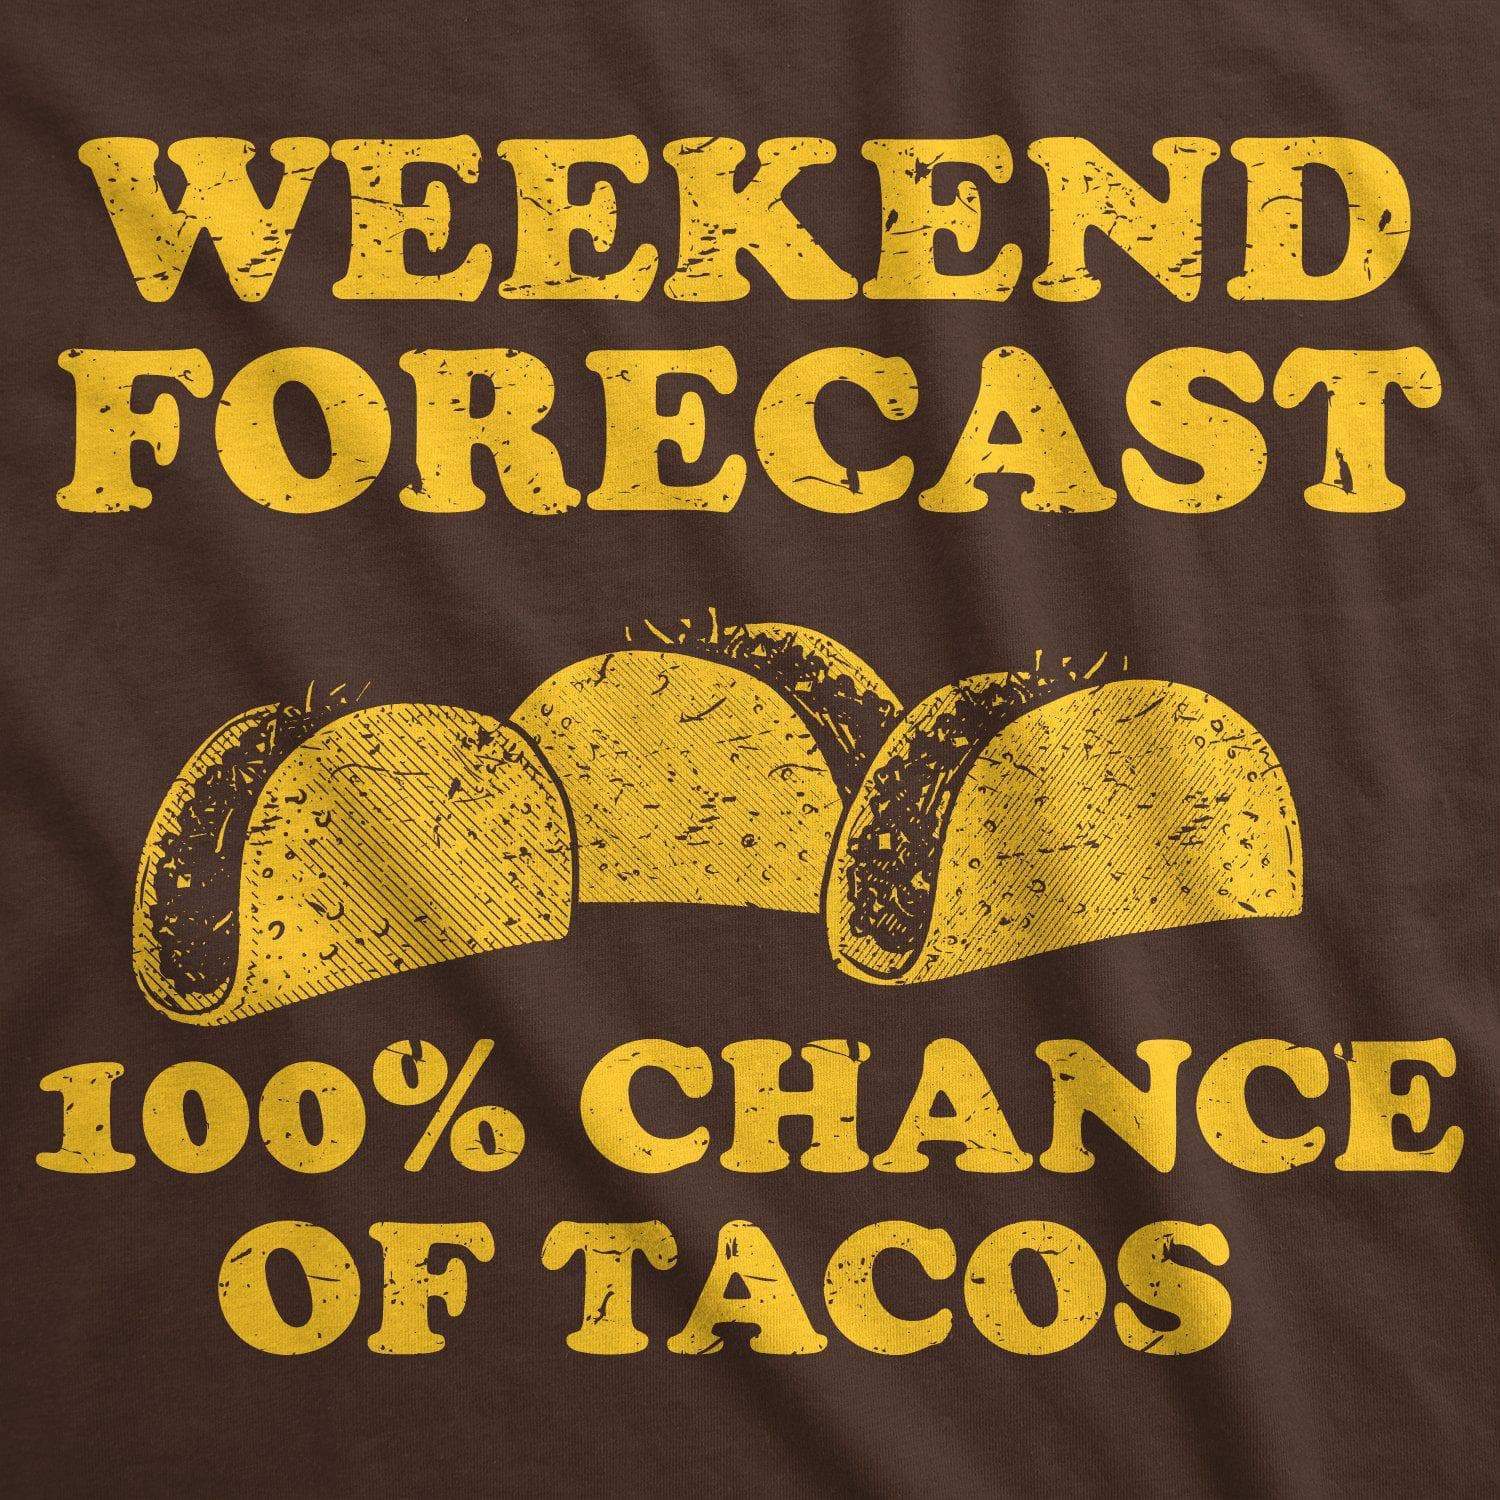 Weekend Forecast 100% Chance of Tacos Men's Tshirt  -  Crazy Dog T-Shirts